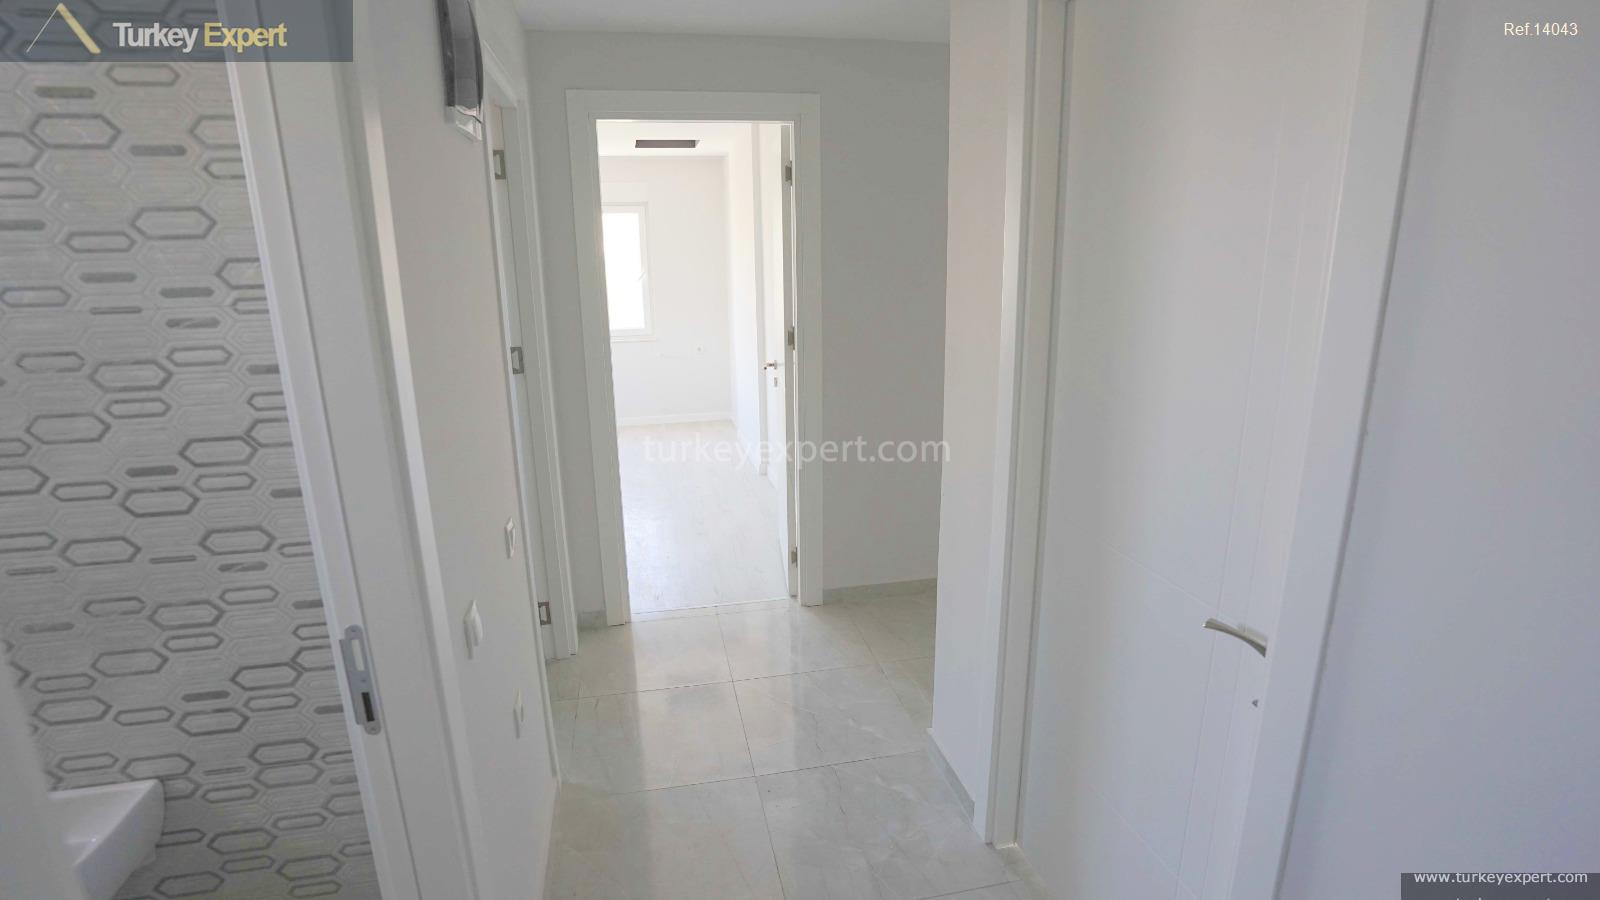 2bedroom apartments for sale with an attractive price in antalya20